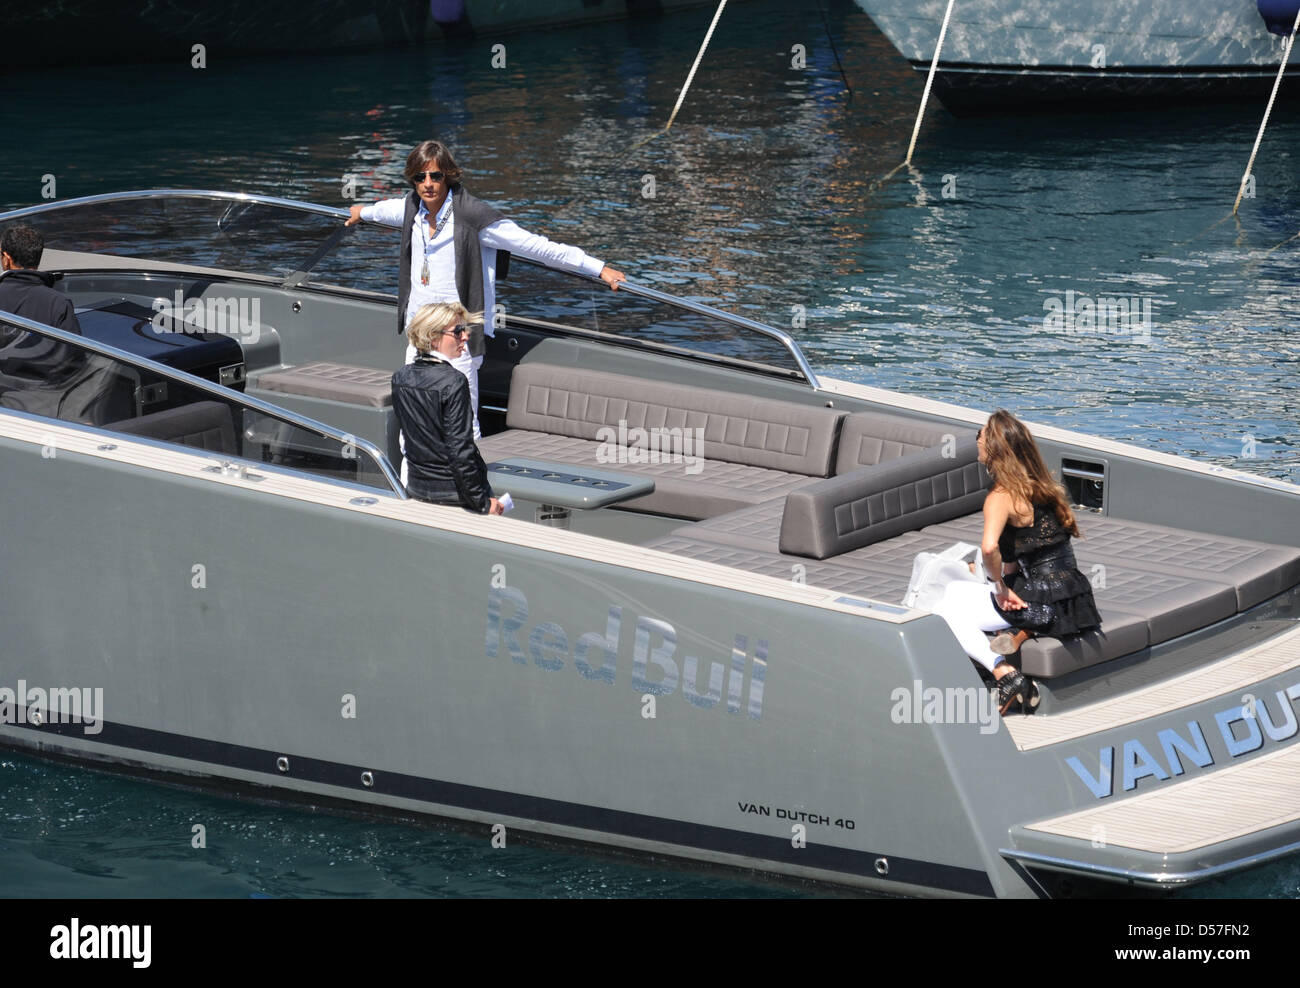 Austria's former Finance Minister, Karl-Heinz Grasser (L) and designer Fiona Swarovski (R) on a motorboat in the harbour of Monte Carlo, Monaco, 14 May 2010. Photo: Peter Steffen Stock Photo